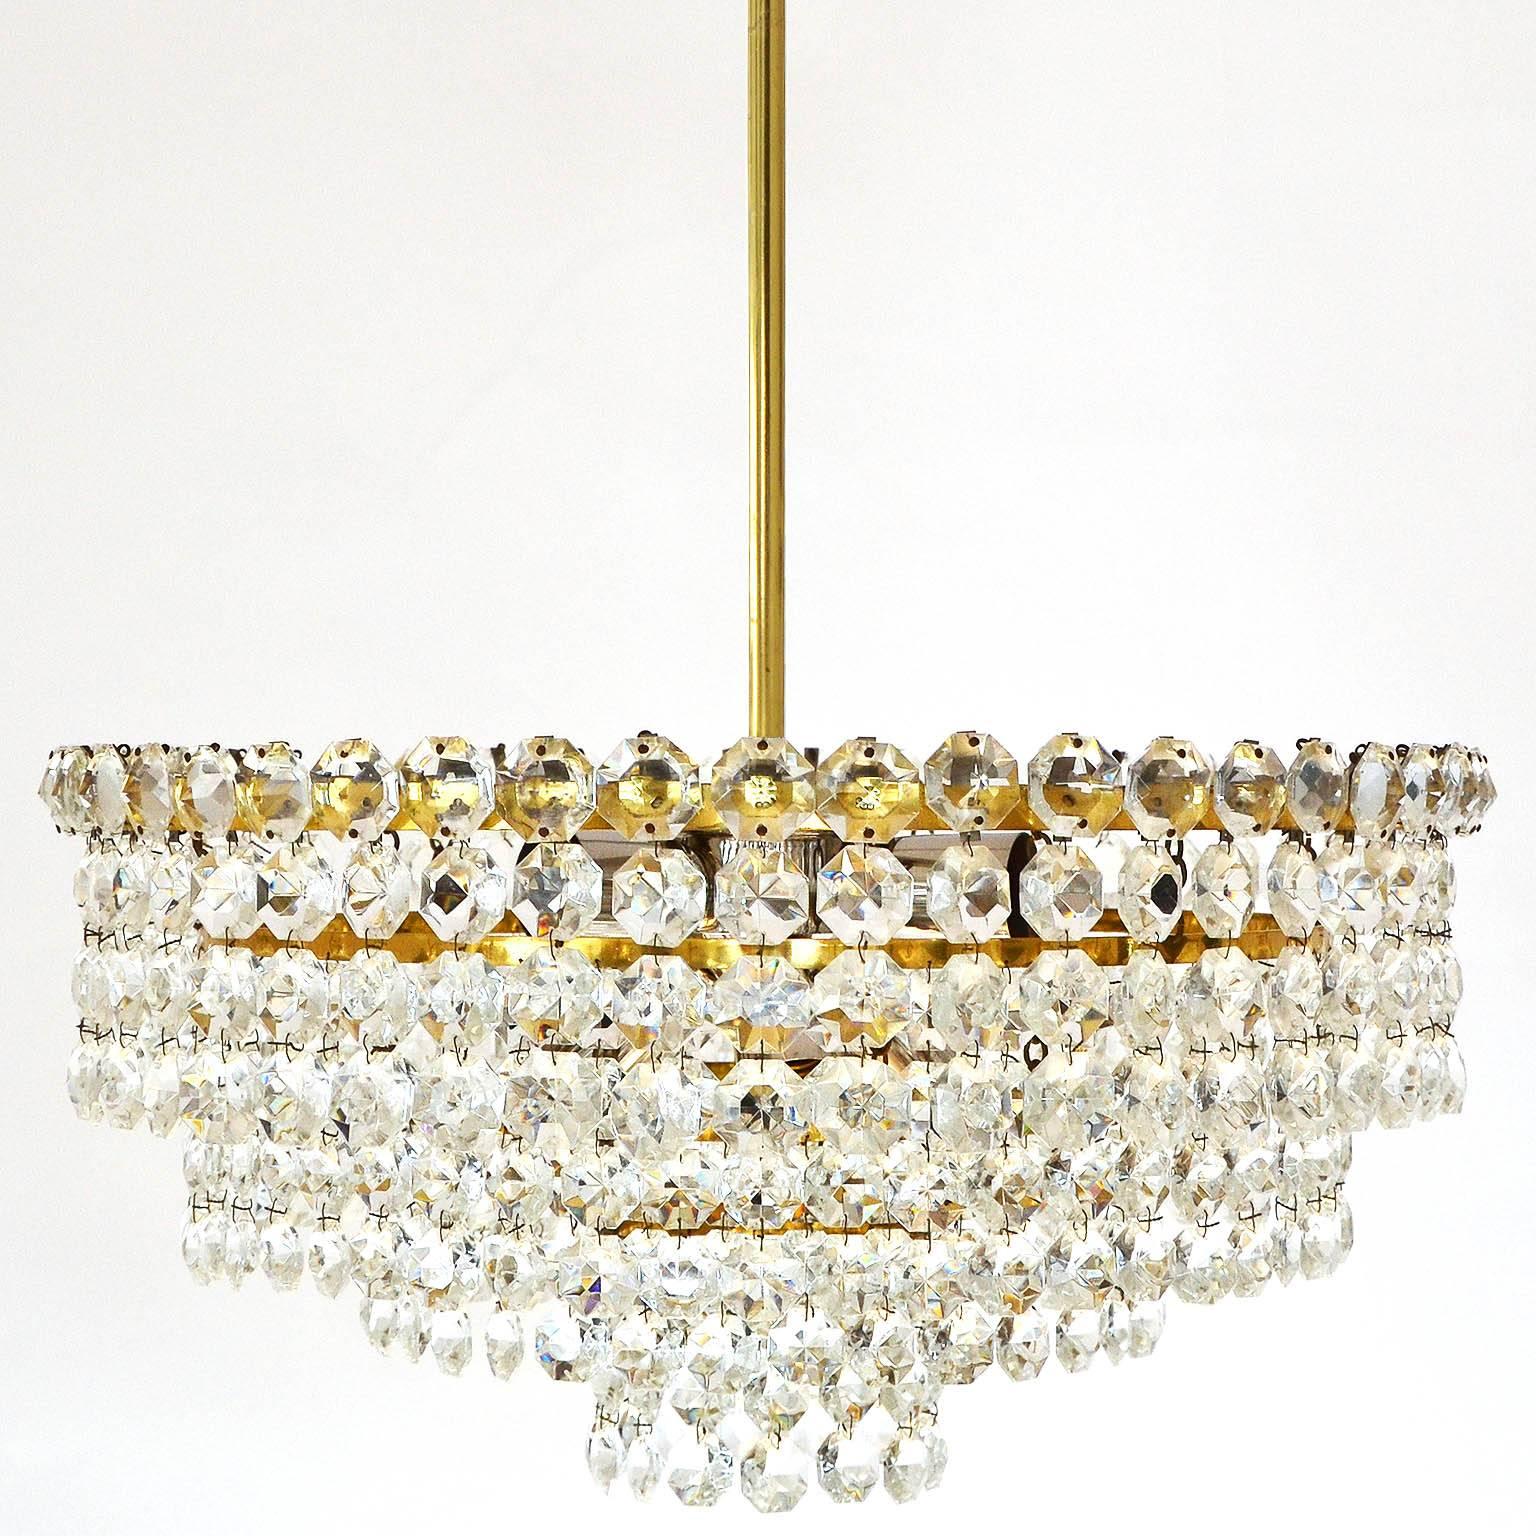 A pair of beautiful and handmade high quality chandeliers 